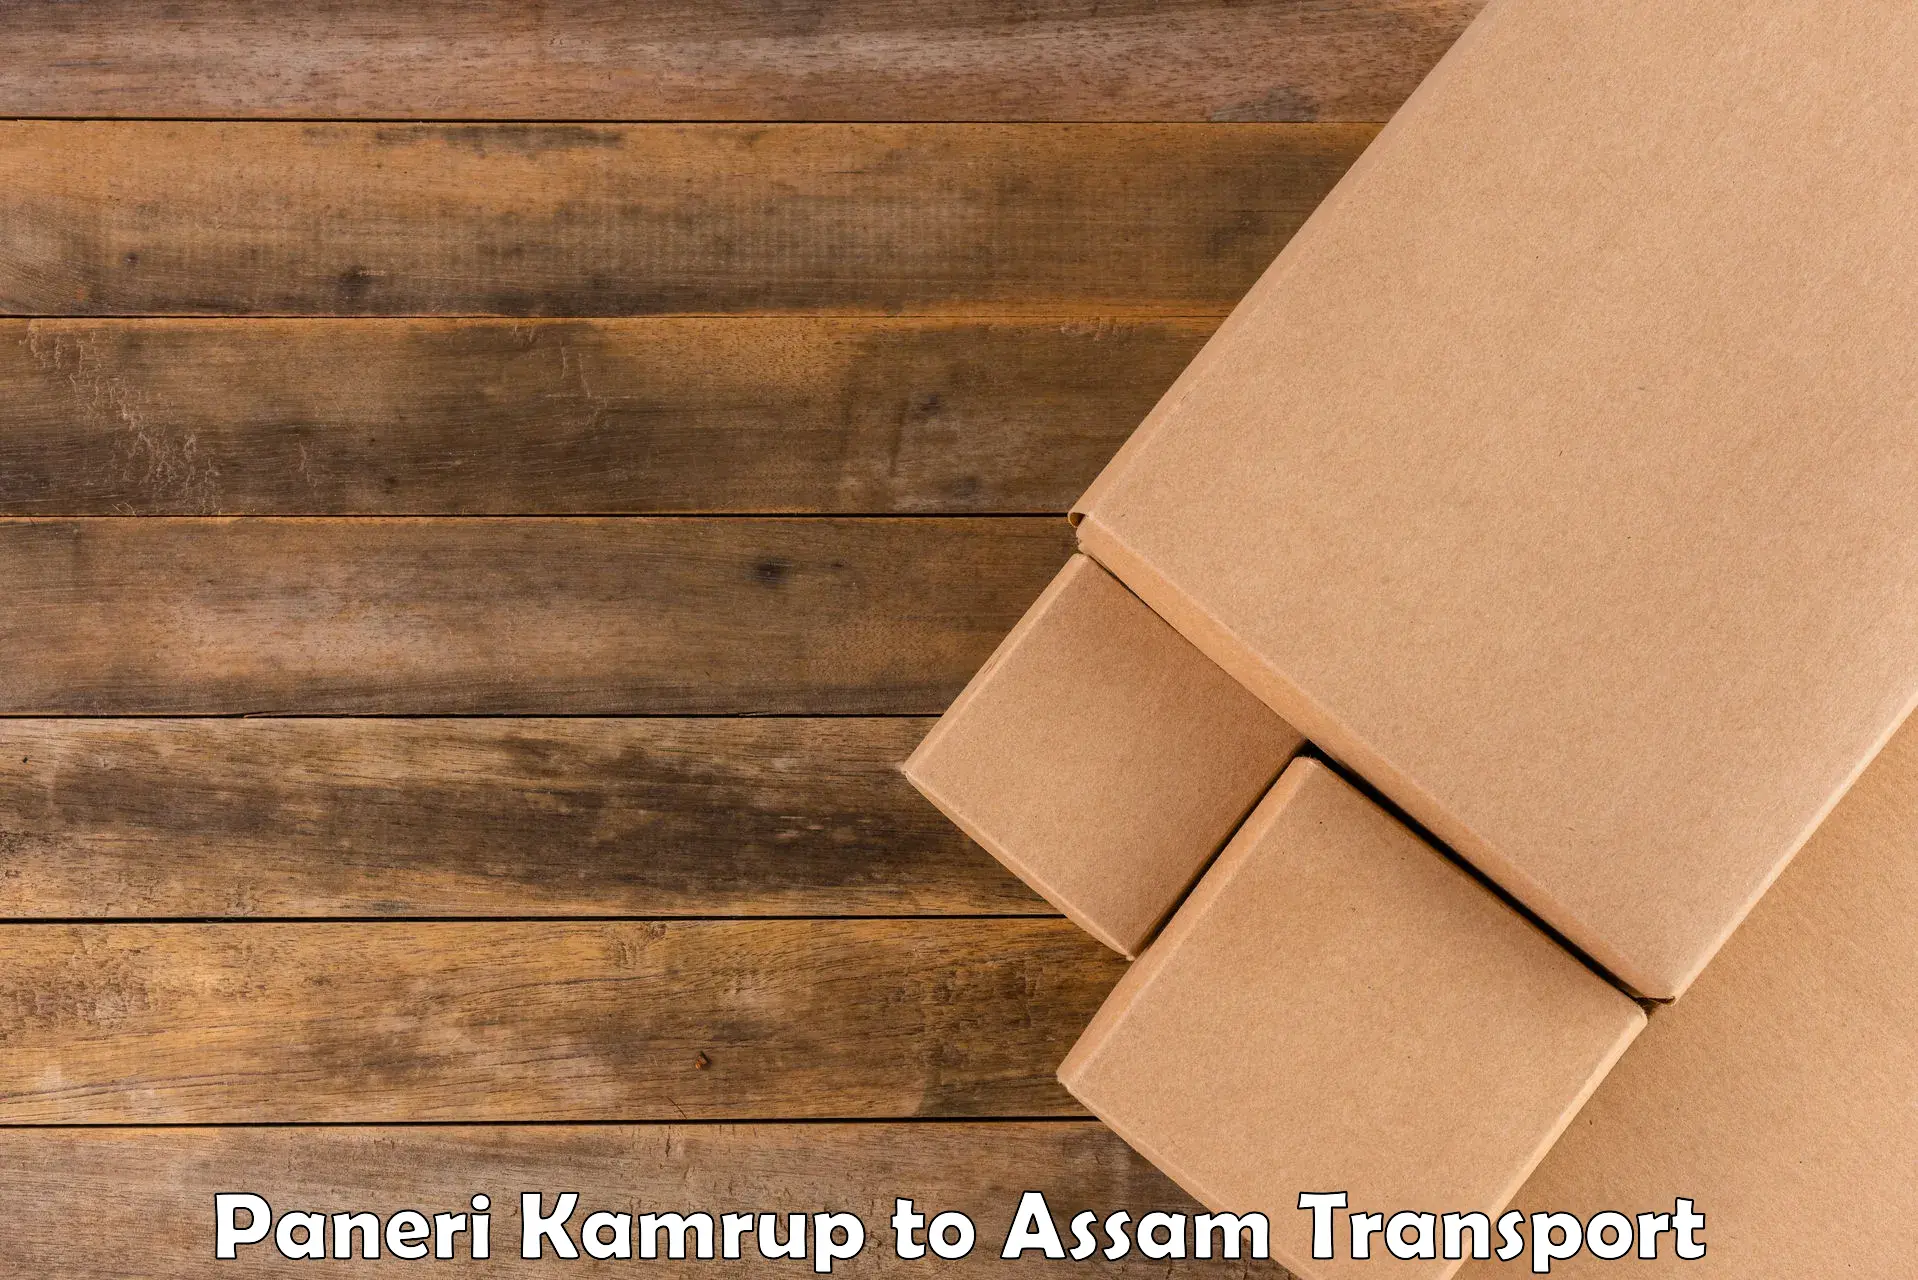 Truck transport companies in India Paneri Kamrup to Demow